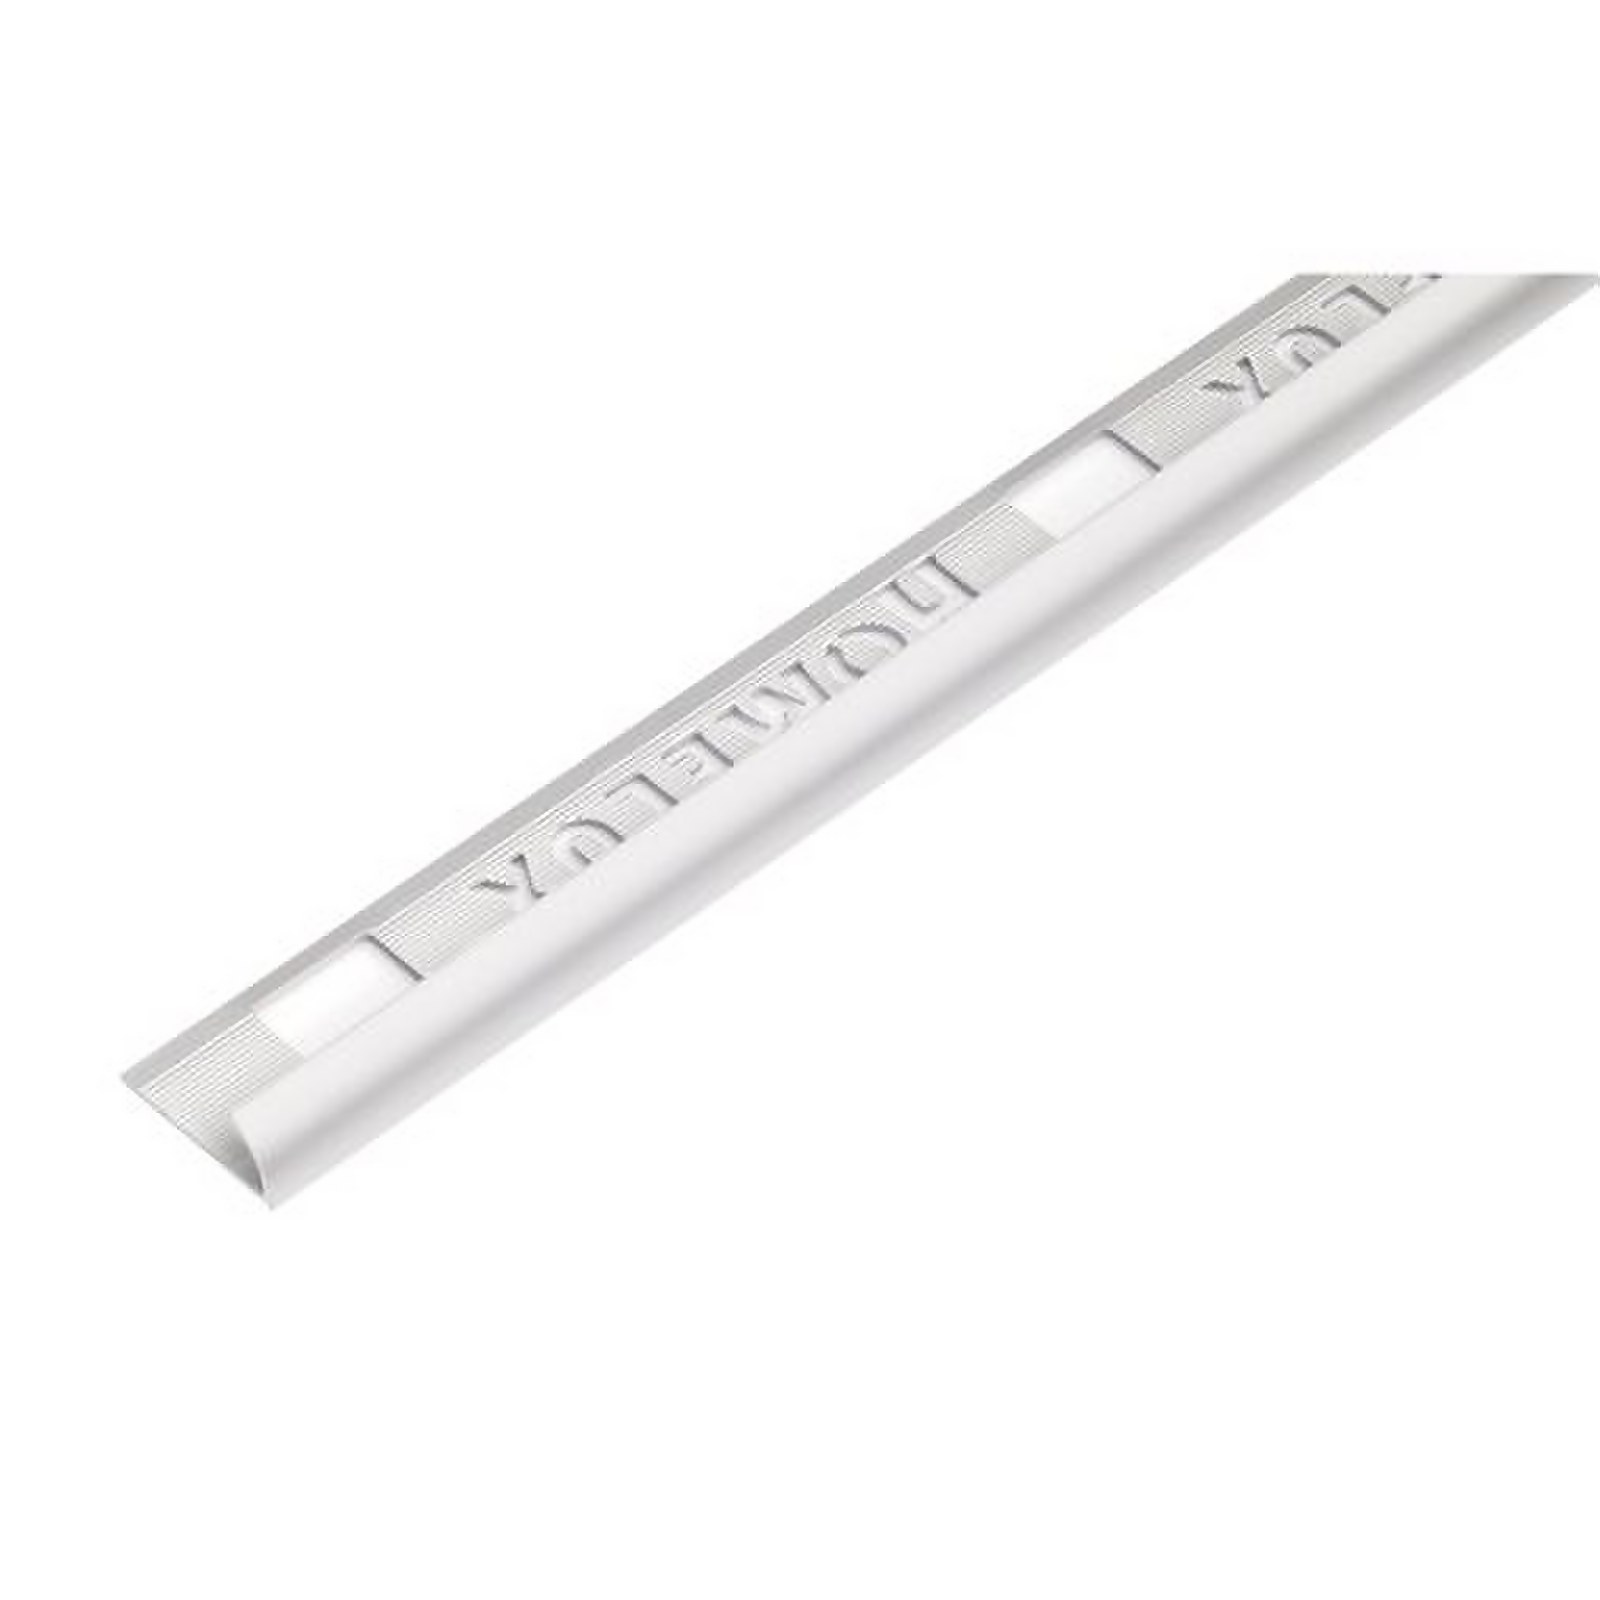 Photo of Homelux 9mm Round Edge Tile Trim - Stainless Steel Effect - 1.83m